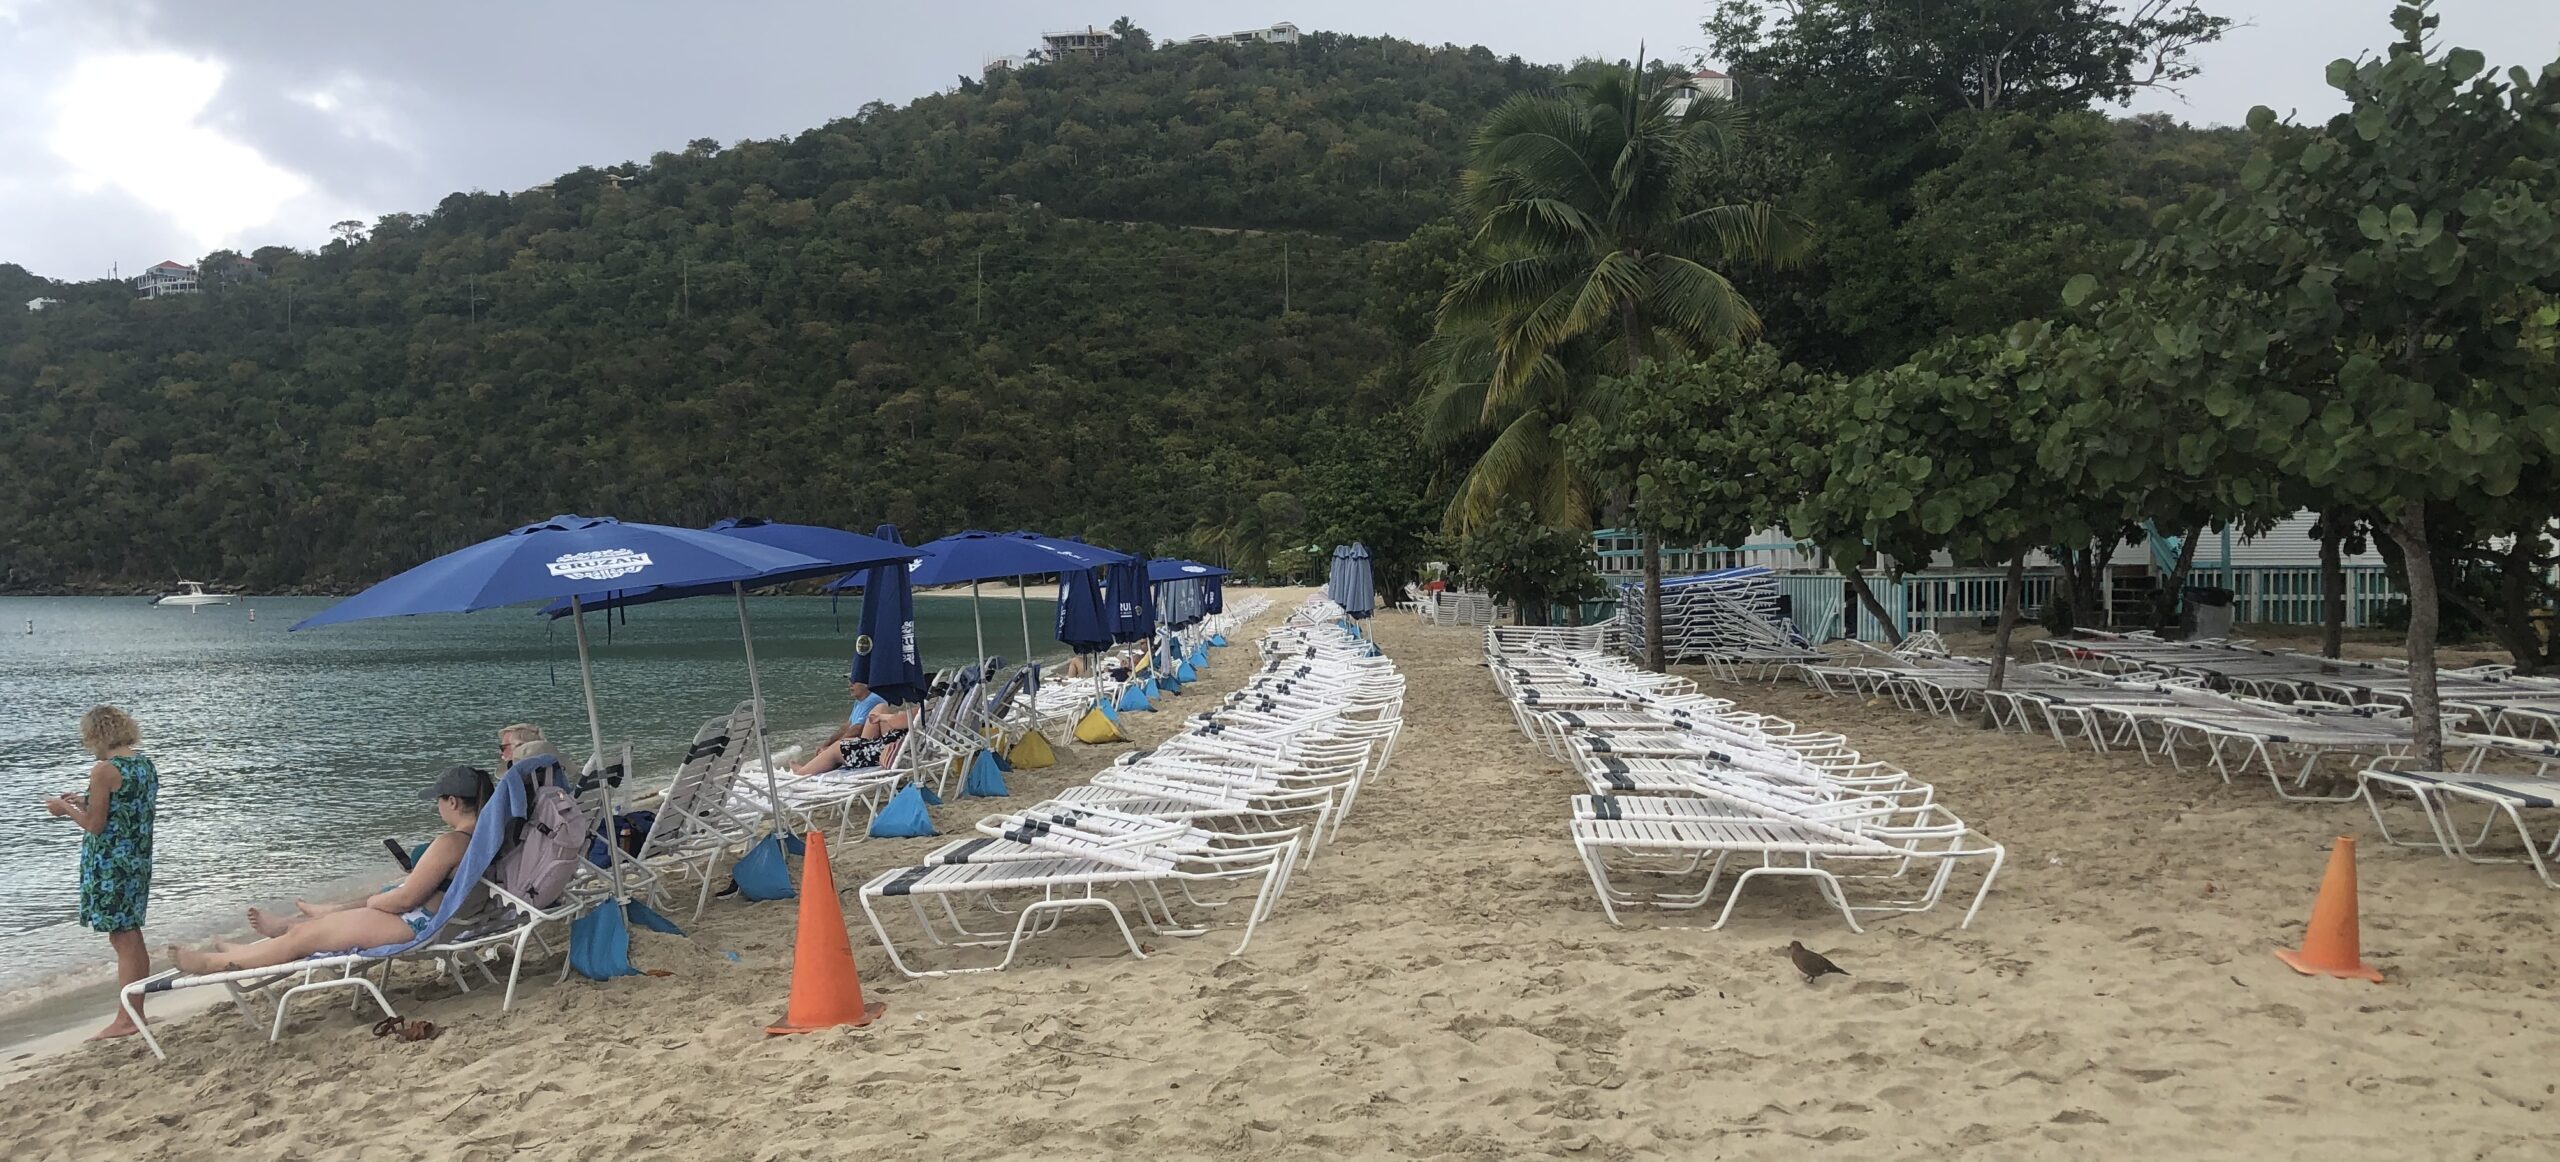 Lounge chairs line the beach near the food concession at Magens Bay beach on Saturday, awaiting the day's cruise ship passengers. (Source photo by Sian Cobb)